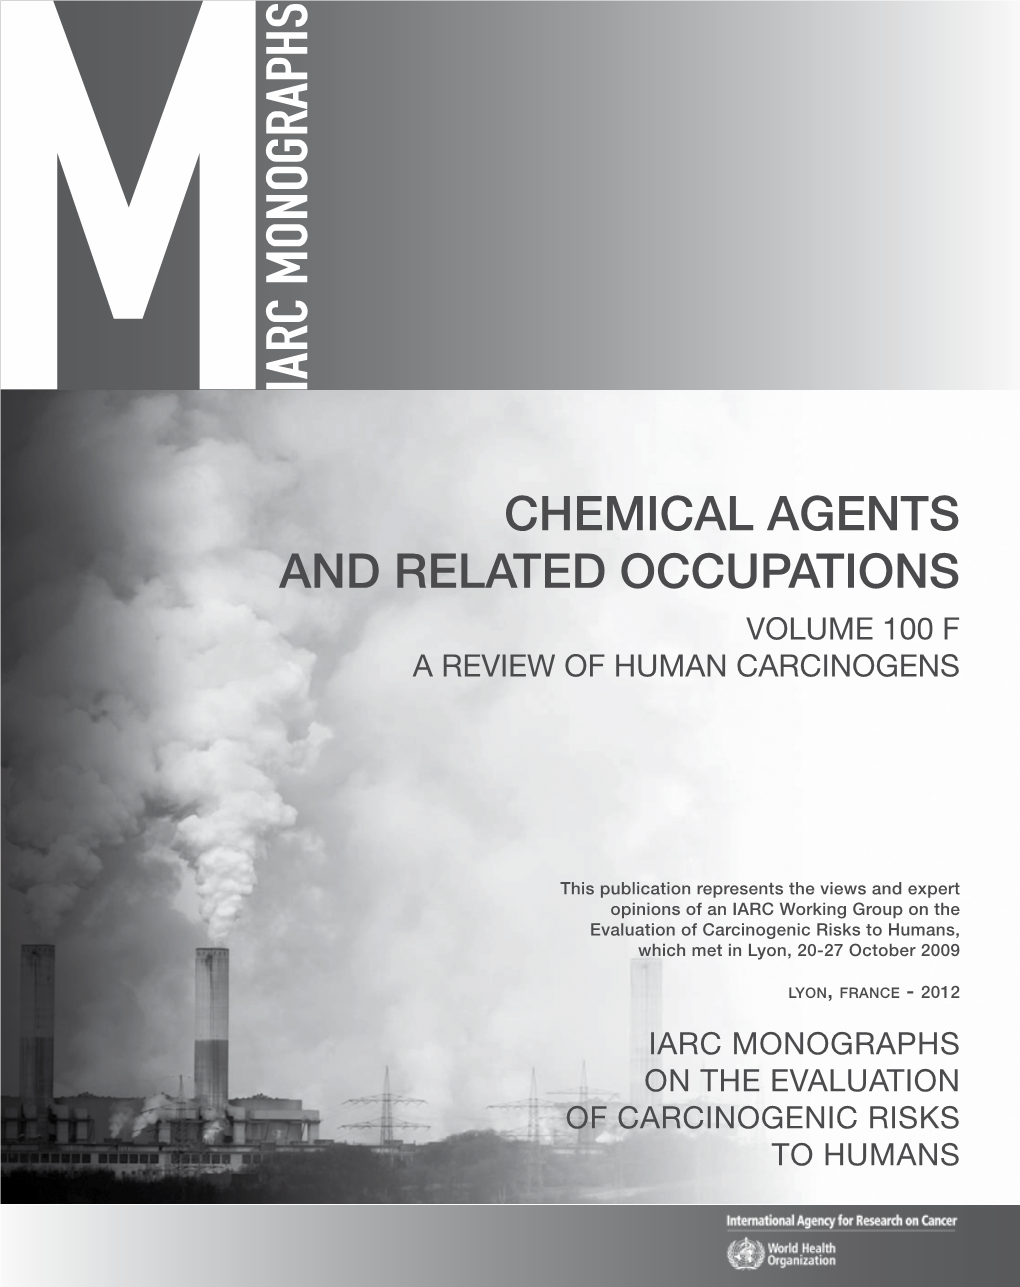 Chemical Agents and Related Occupations Volume 100 F a Review of Human Carcinogens